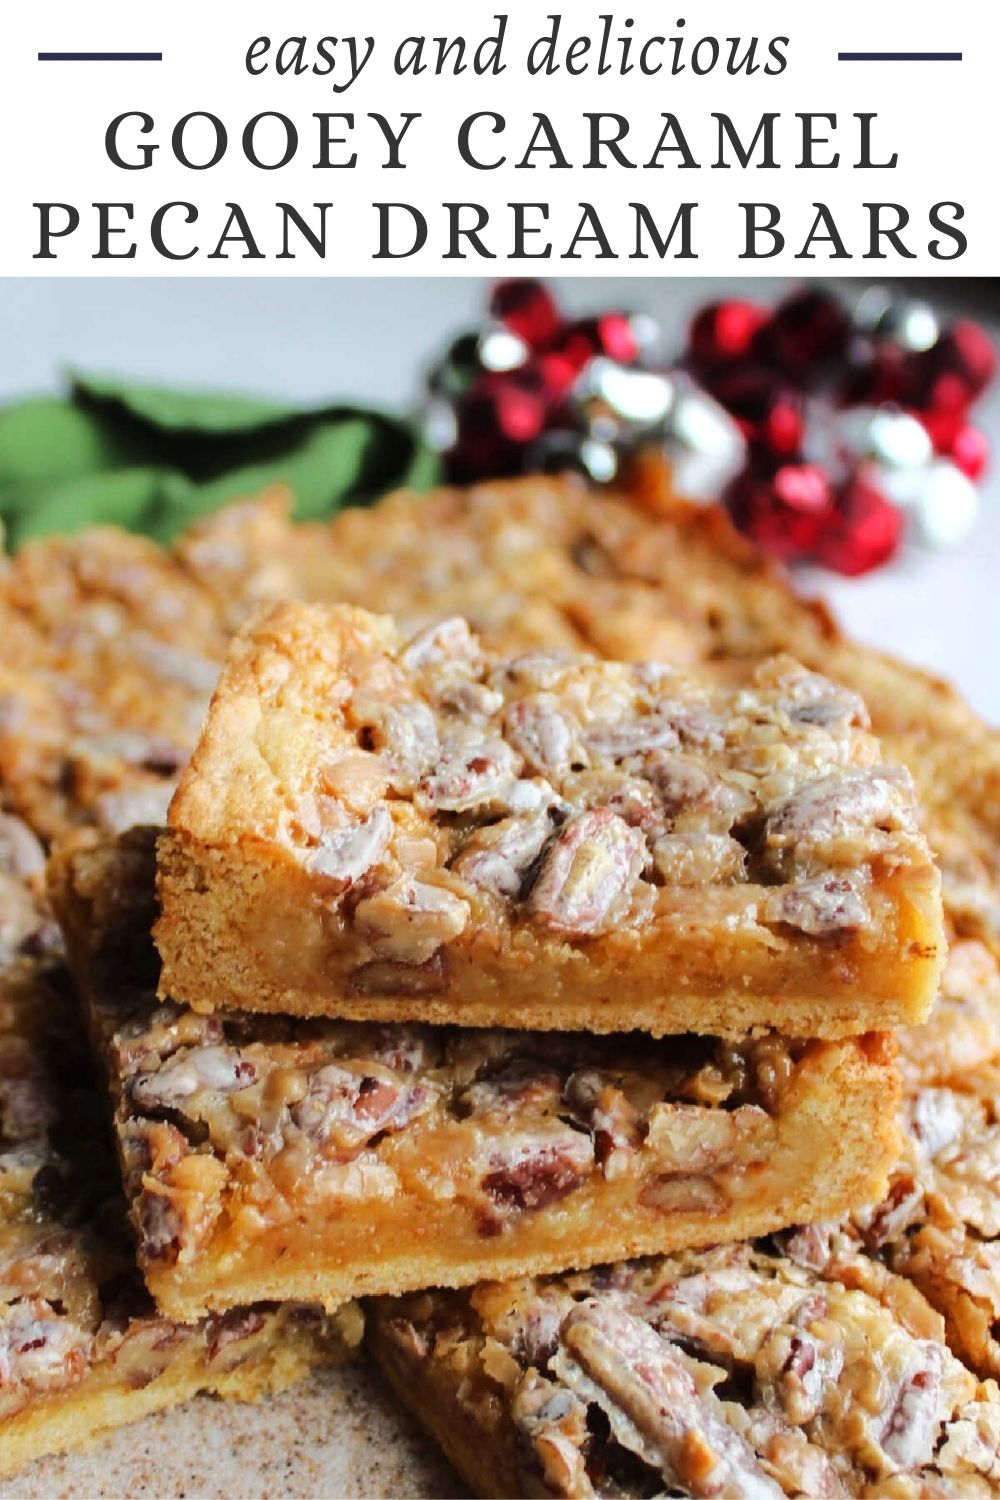 Gooey pecan dream bars are the perfect mix of soft and gooey with a little bit of pecan crunch. They use a box cake mix, toffee bits, and sweetened condensed milk to make an easy but memorable dessert.